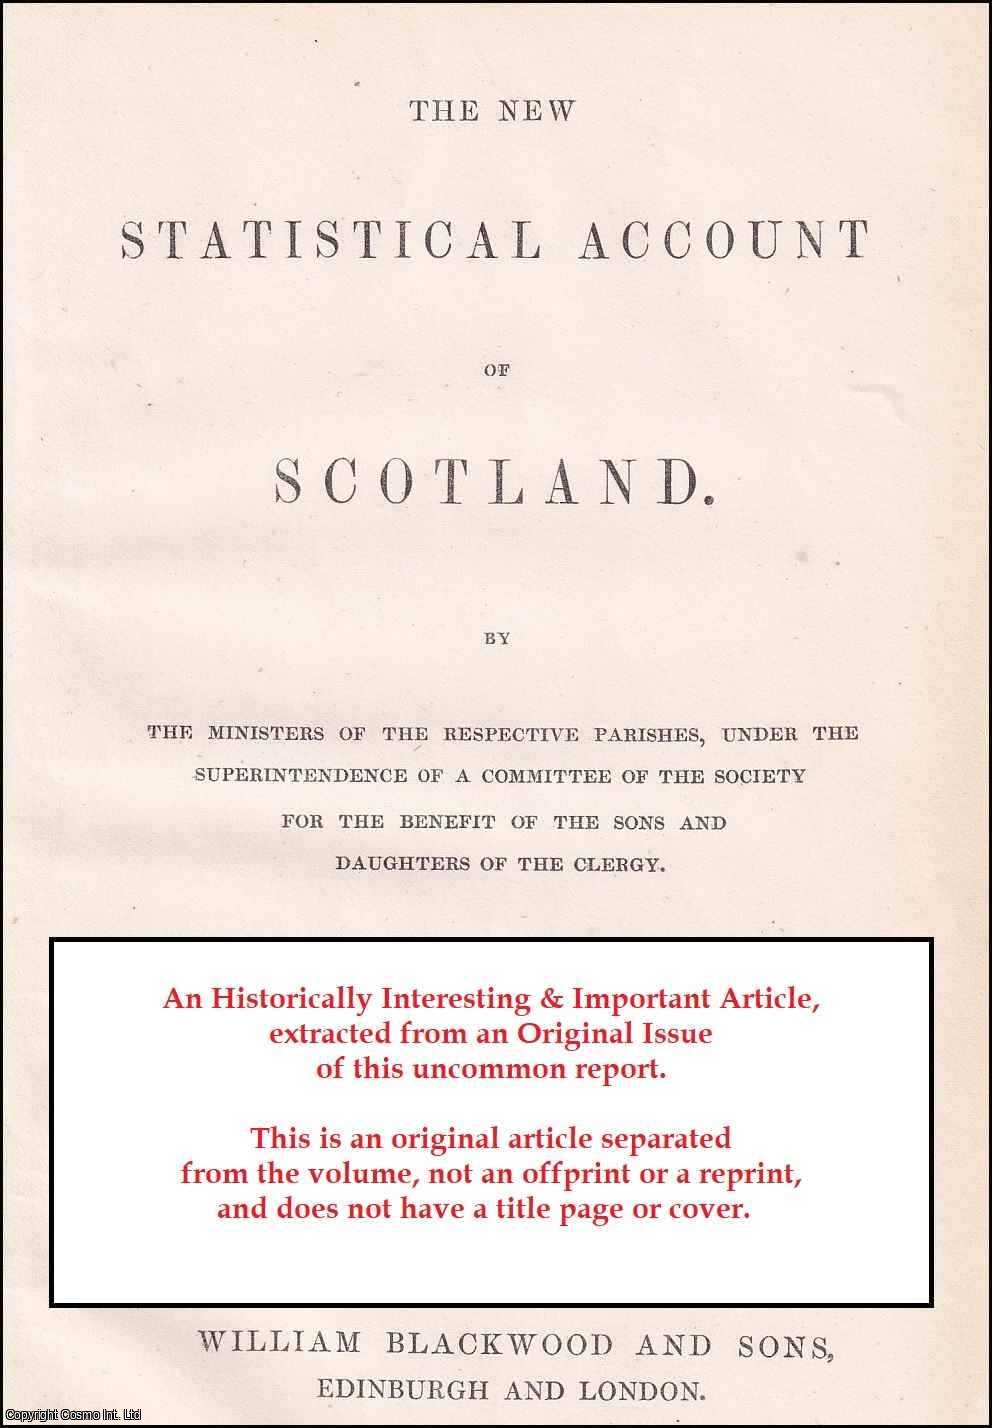 Rev. John Leslie - Parish of Fintray. Presbytery of Aberdeen, Synod of Aberdeen. An uncommon original article from The New Statistical Account of Scotland, 1845.